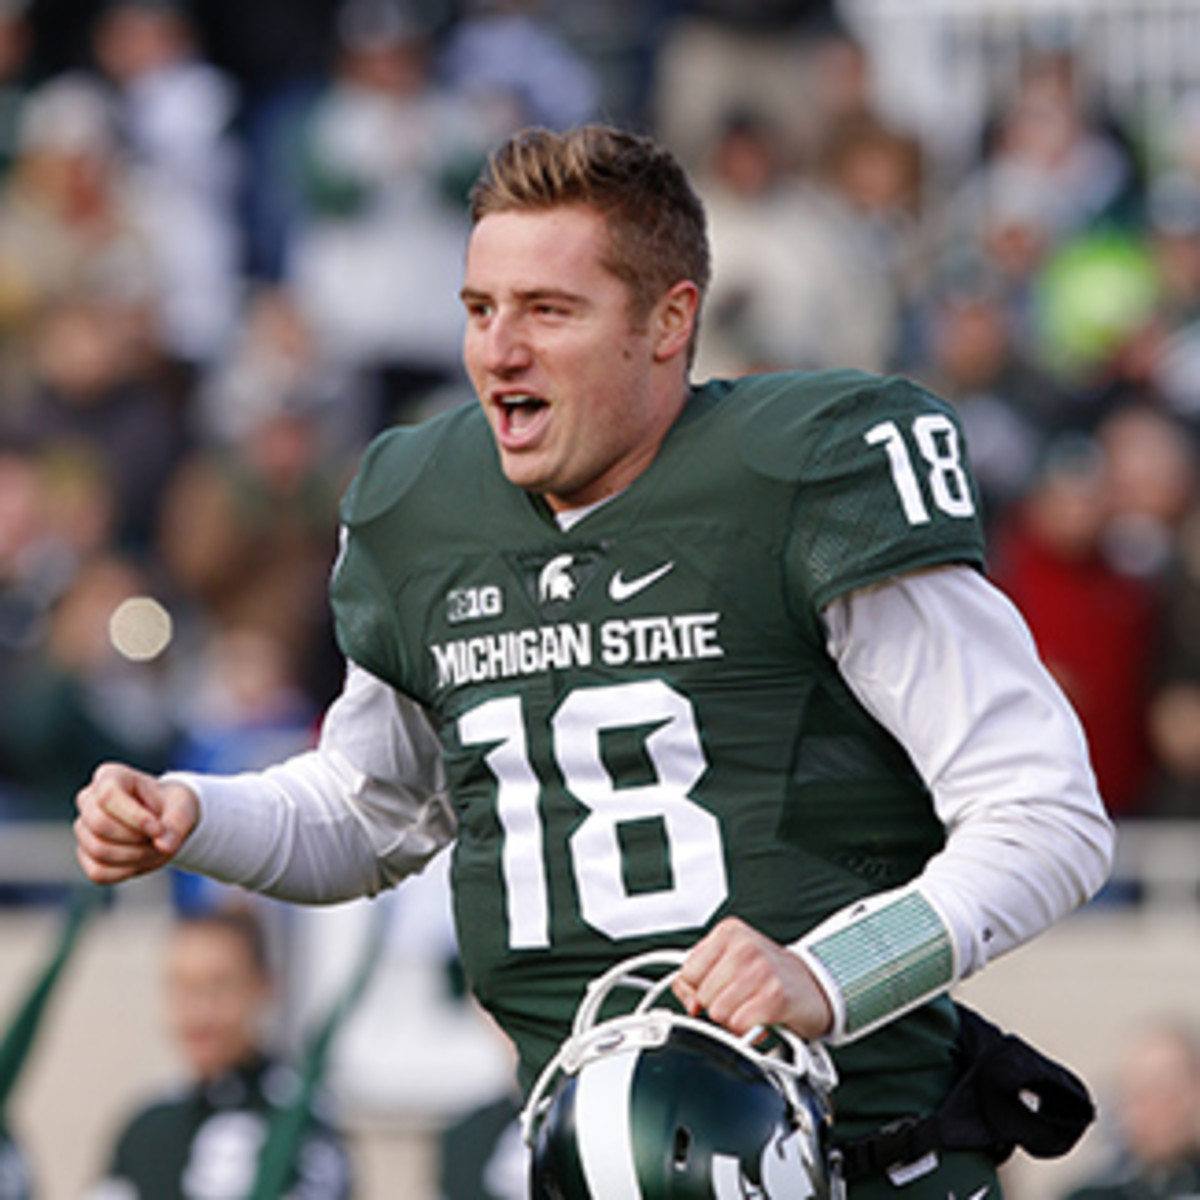 Connor Cook was 5-2 against Top 10 opponents at Michigan State.